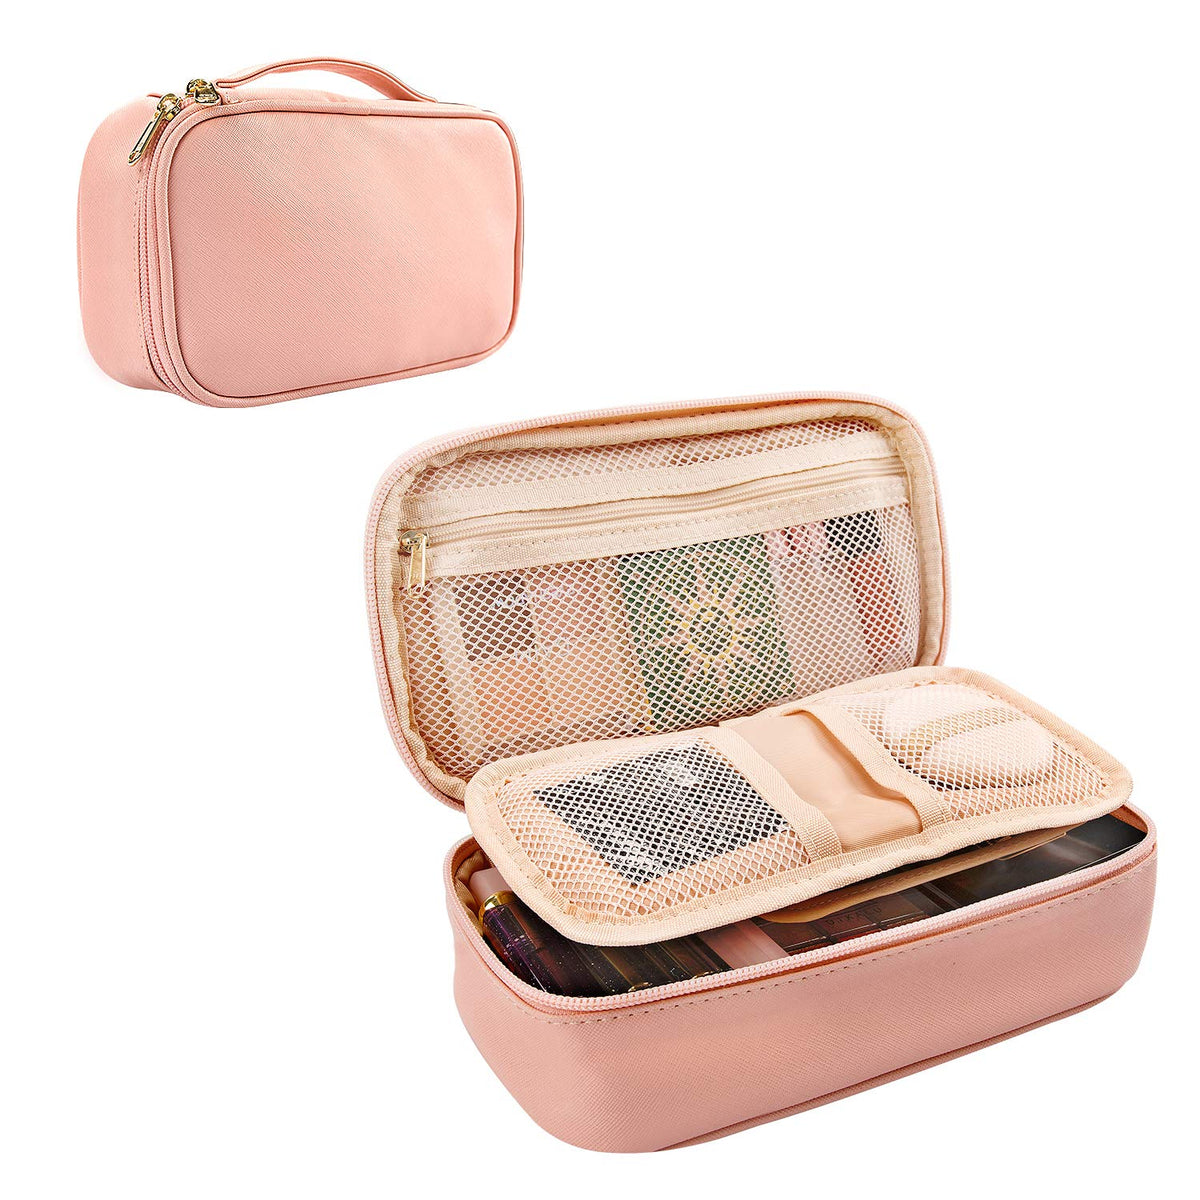 Small Makeup Bag, Relavel Cosmetic Bag for Women 2 Layer Travel